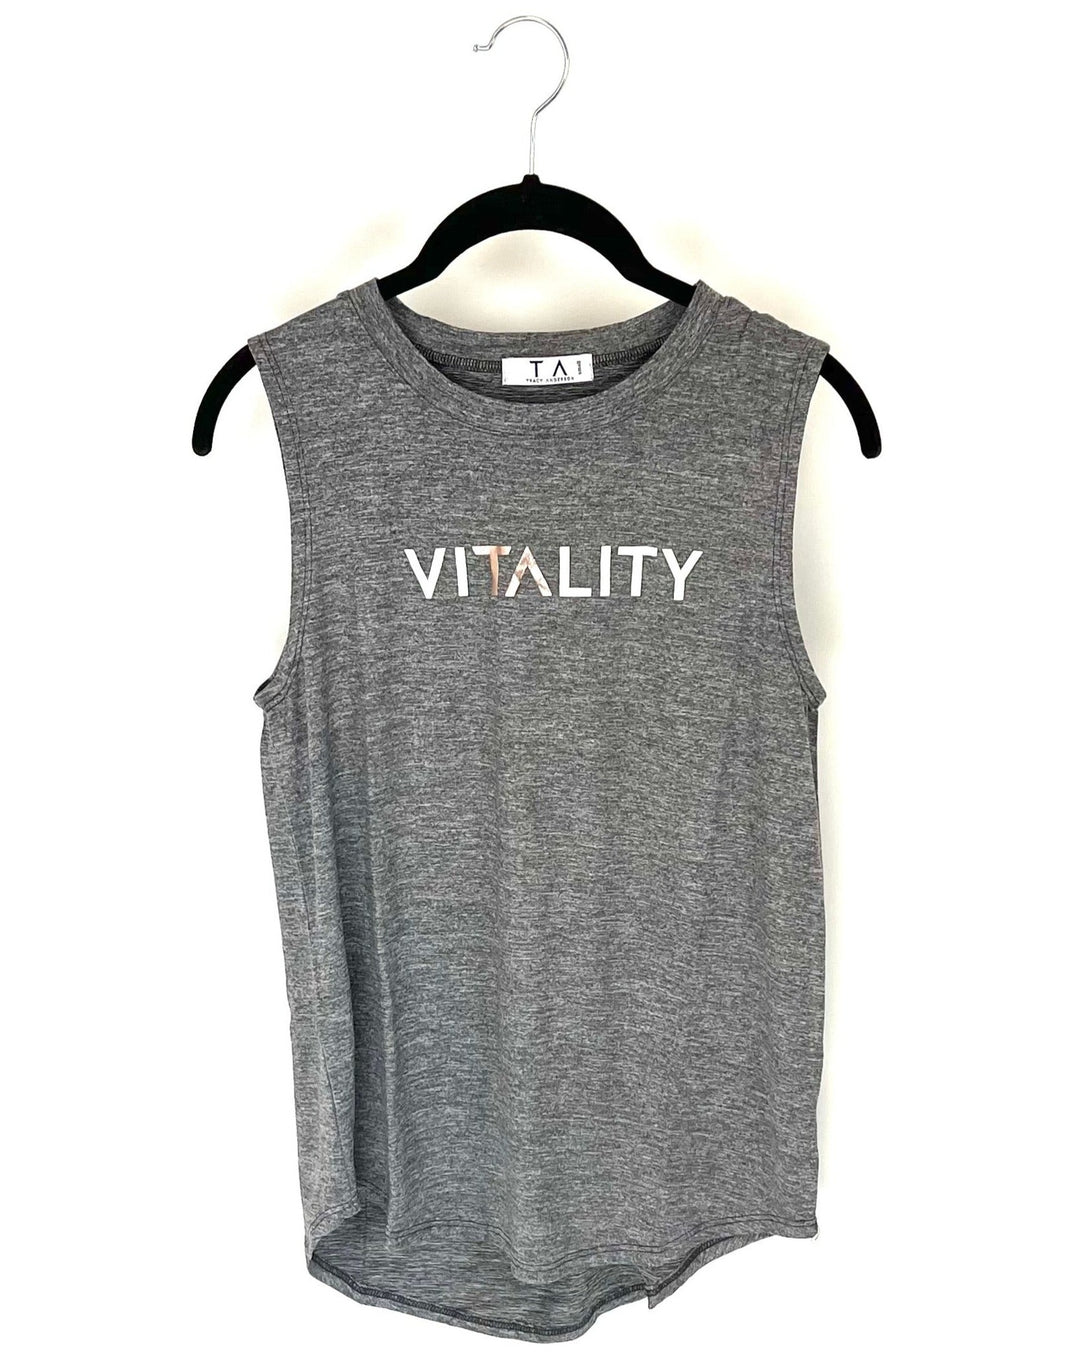 Grey and Rose Gold Vitality Ultra Soft Top - Size 2/4, 4/6 and 6/8